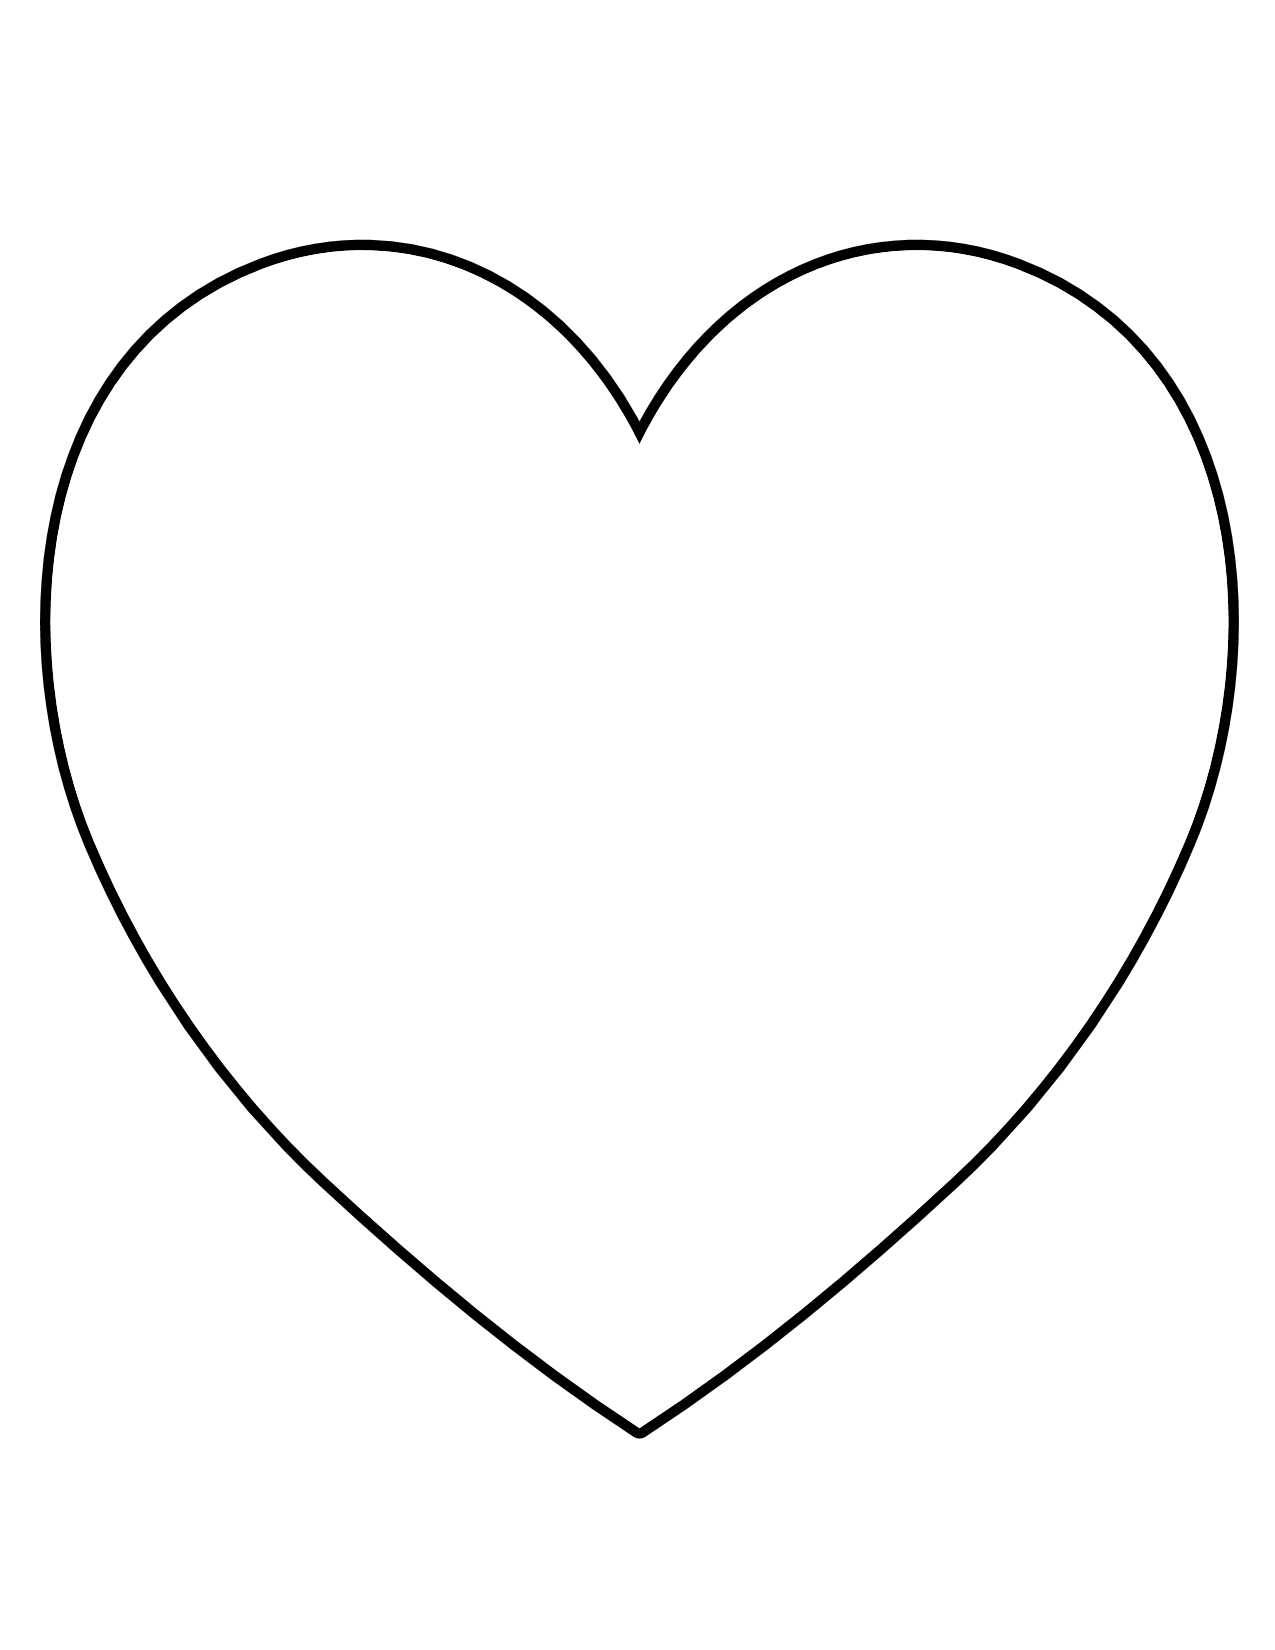 Heart Shaped Template Free - ClipArt Best